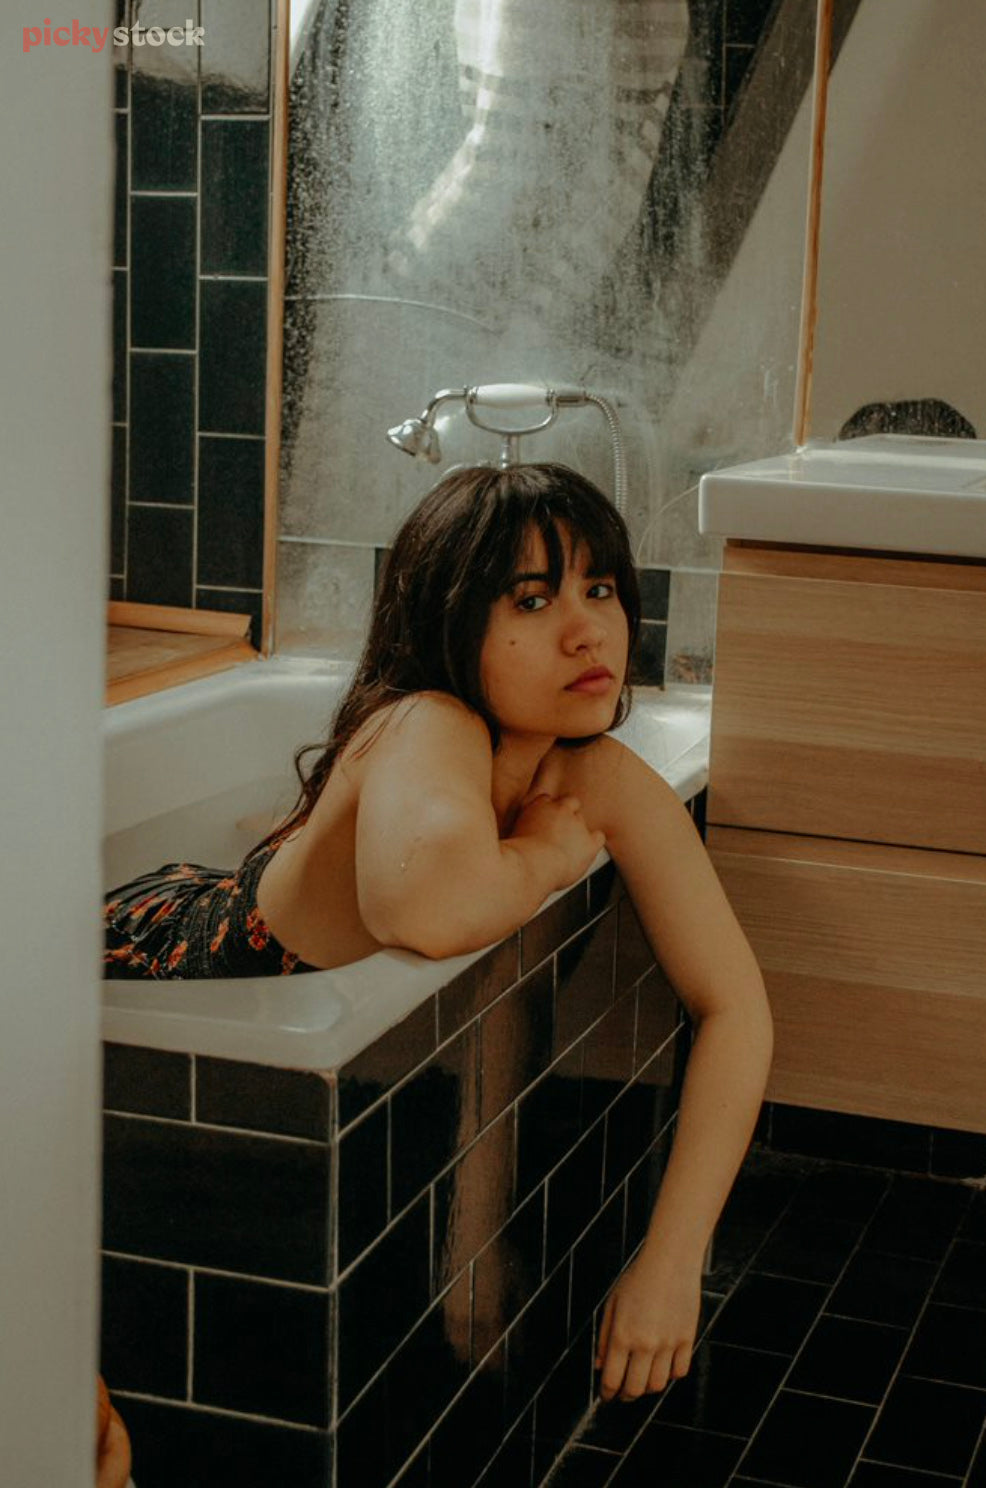 A lady lies peers out to camera from a bathtub in a dark tiled bathroom. She artfully covers herself with arms leaning on the edge of the bath as she gazes direct to camera. 